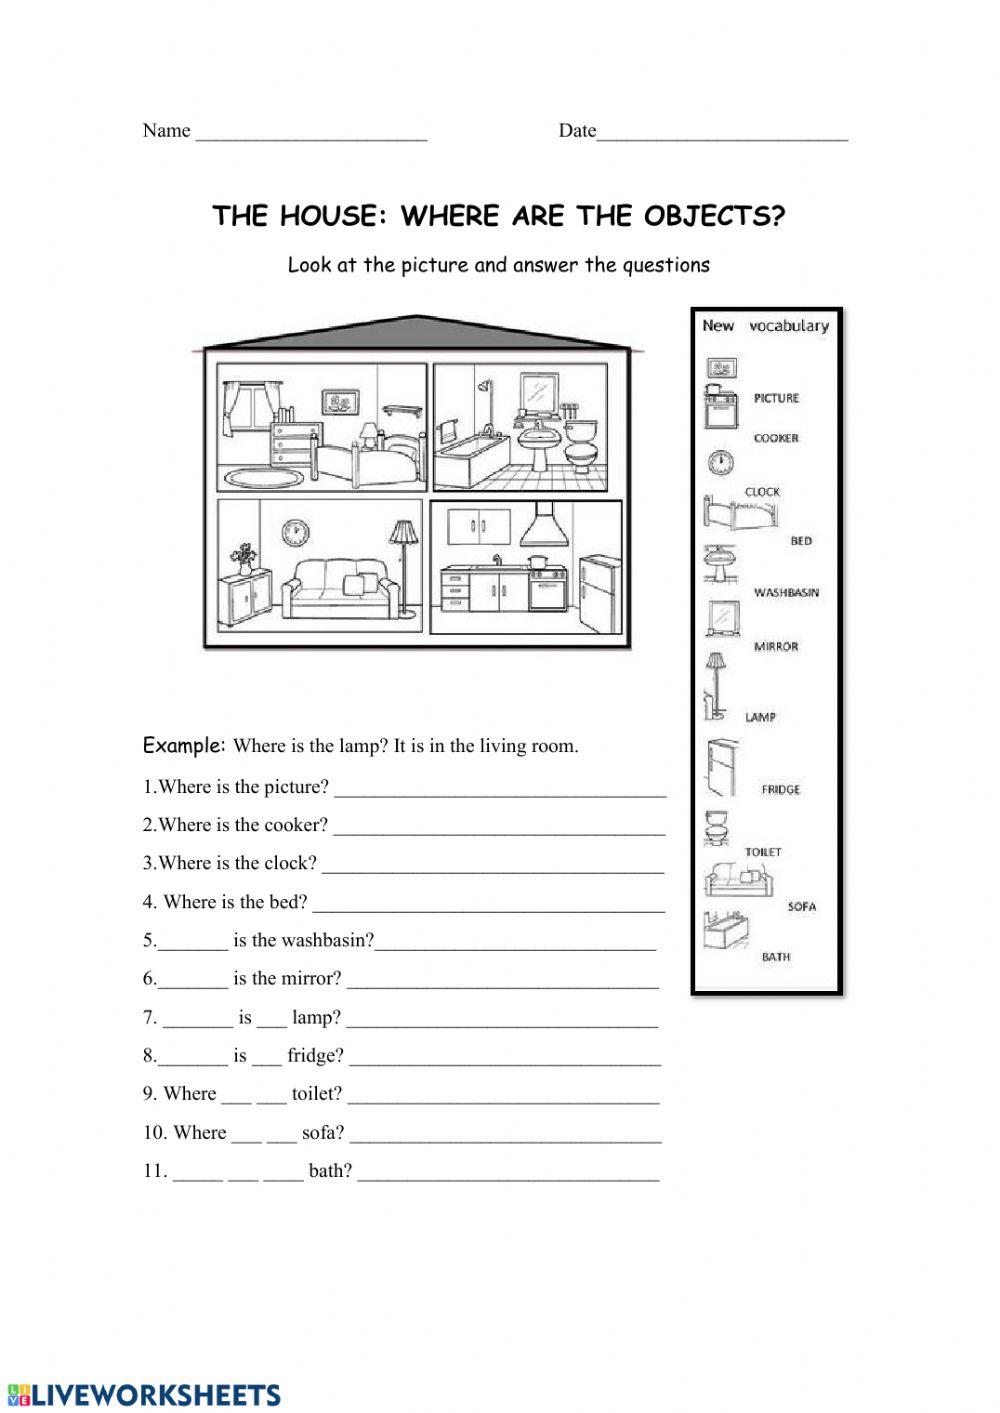 Objects in the house online worksheet for 1st Primary | Live Worksheets